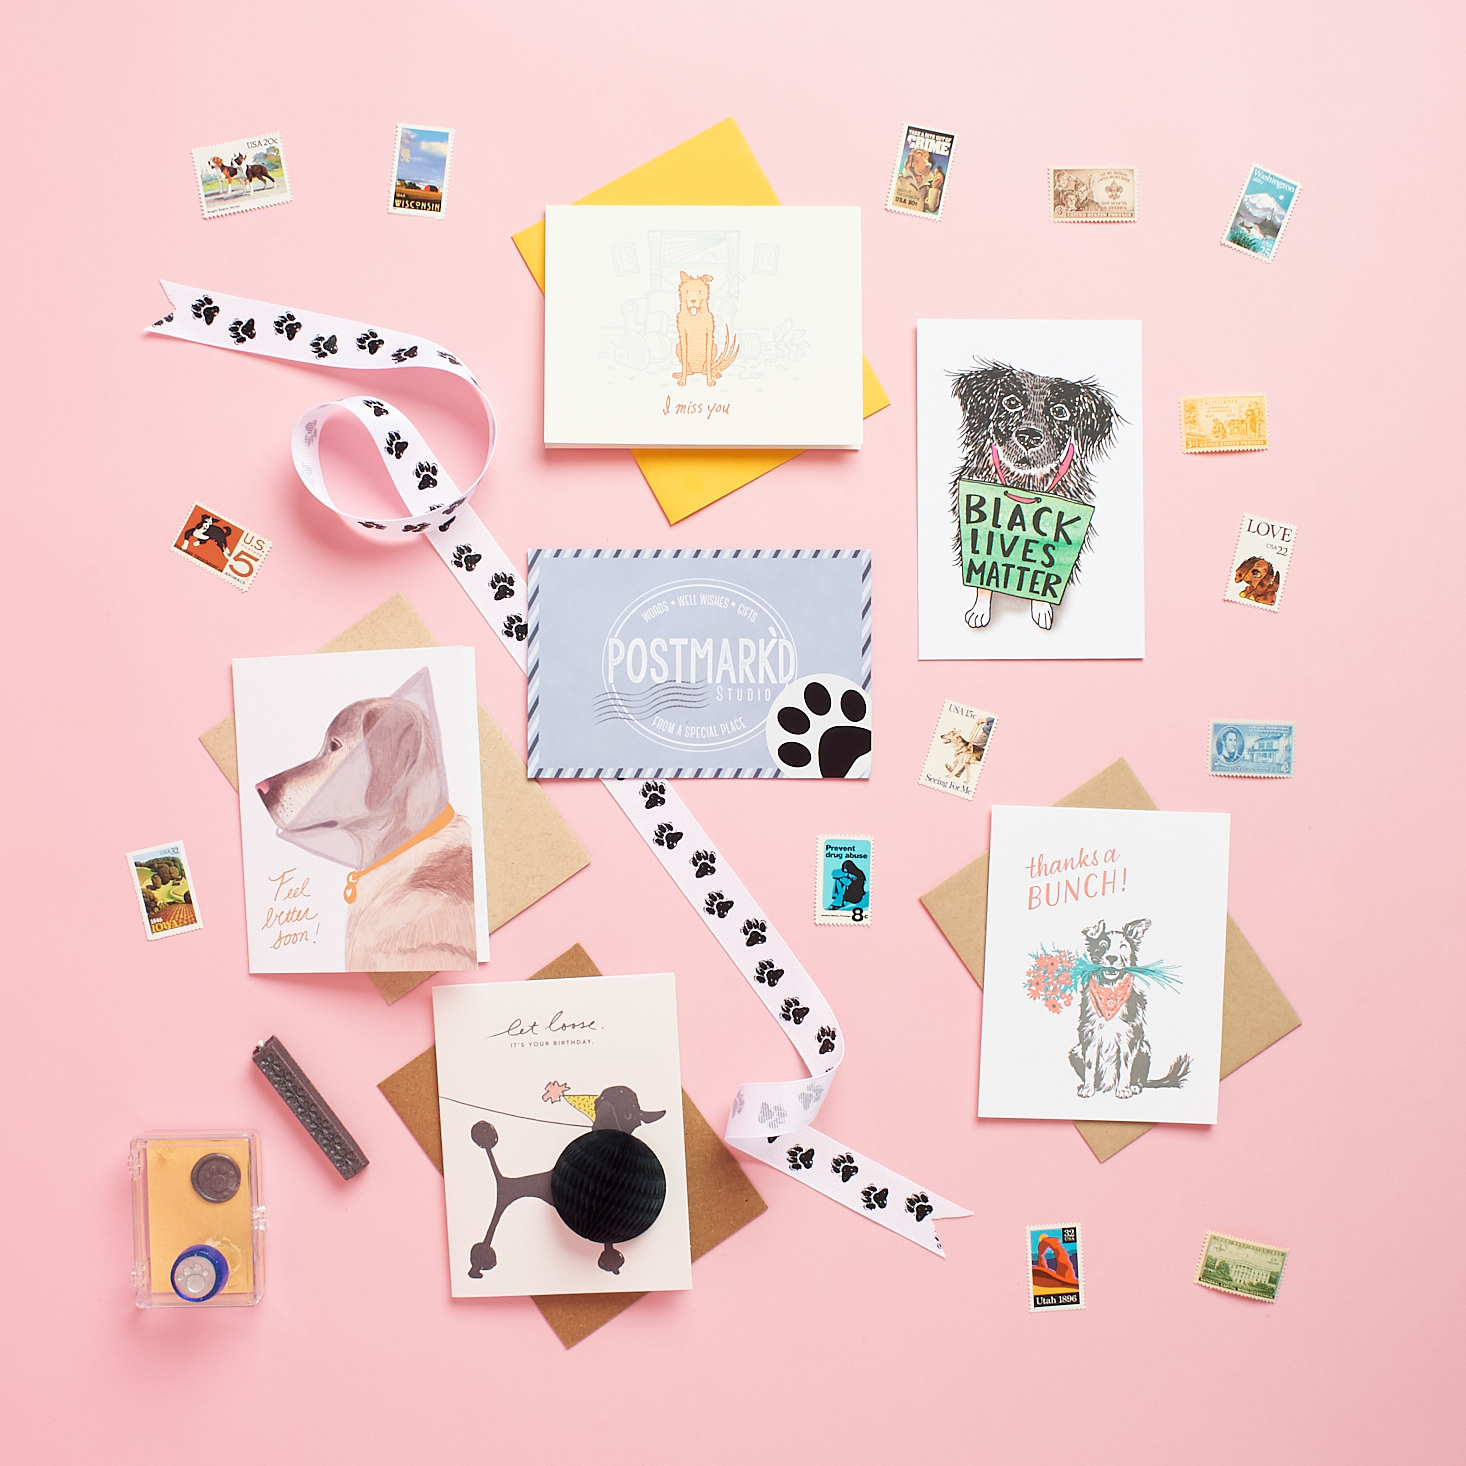 All stationery items from Postmark